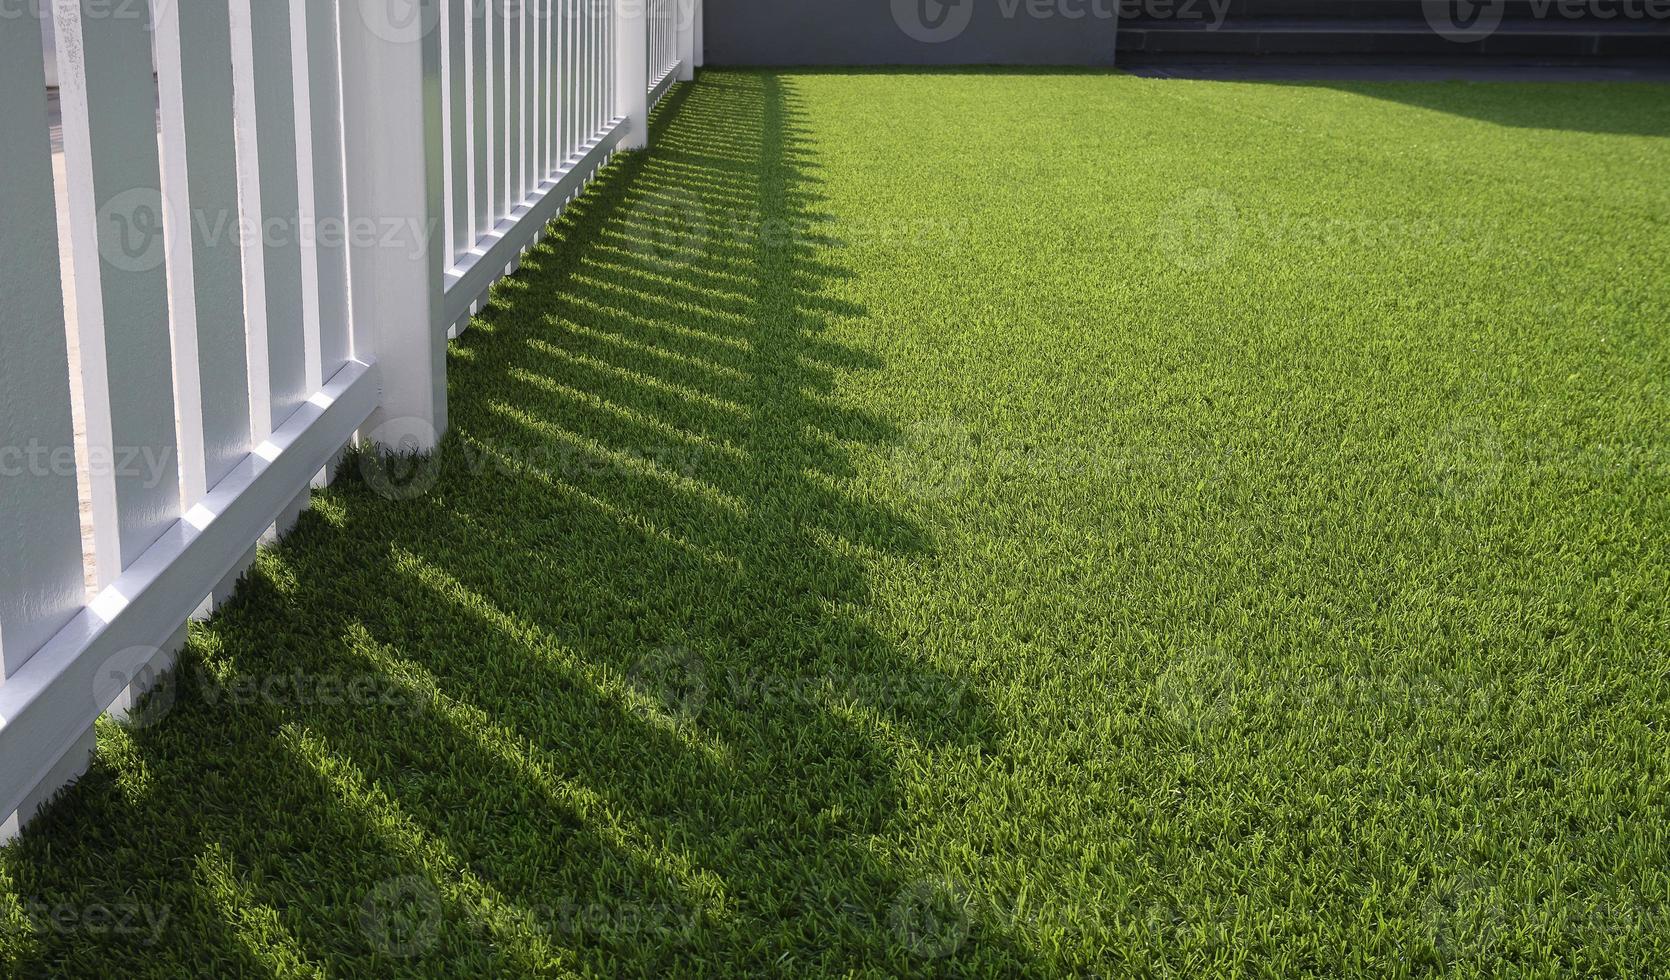 Sunlight and shadow of white wooden fence on green artificial turf surface in front yard of home, selective focus with copy space photo